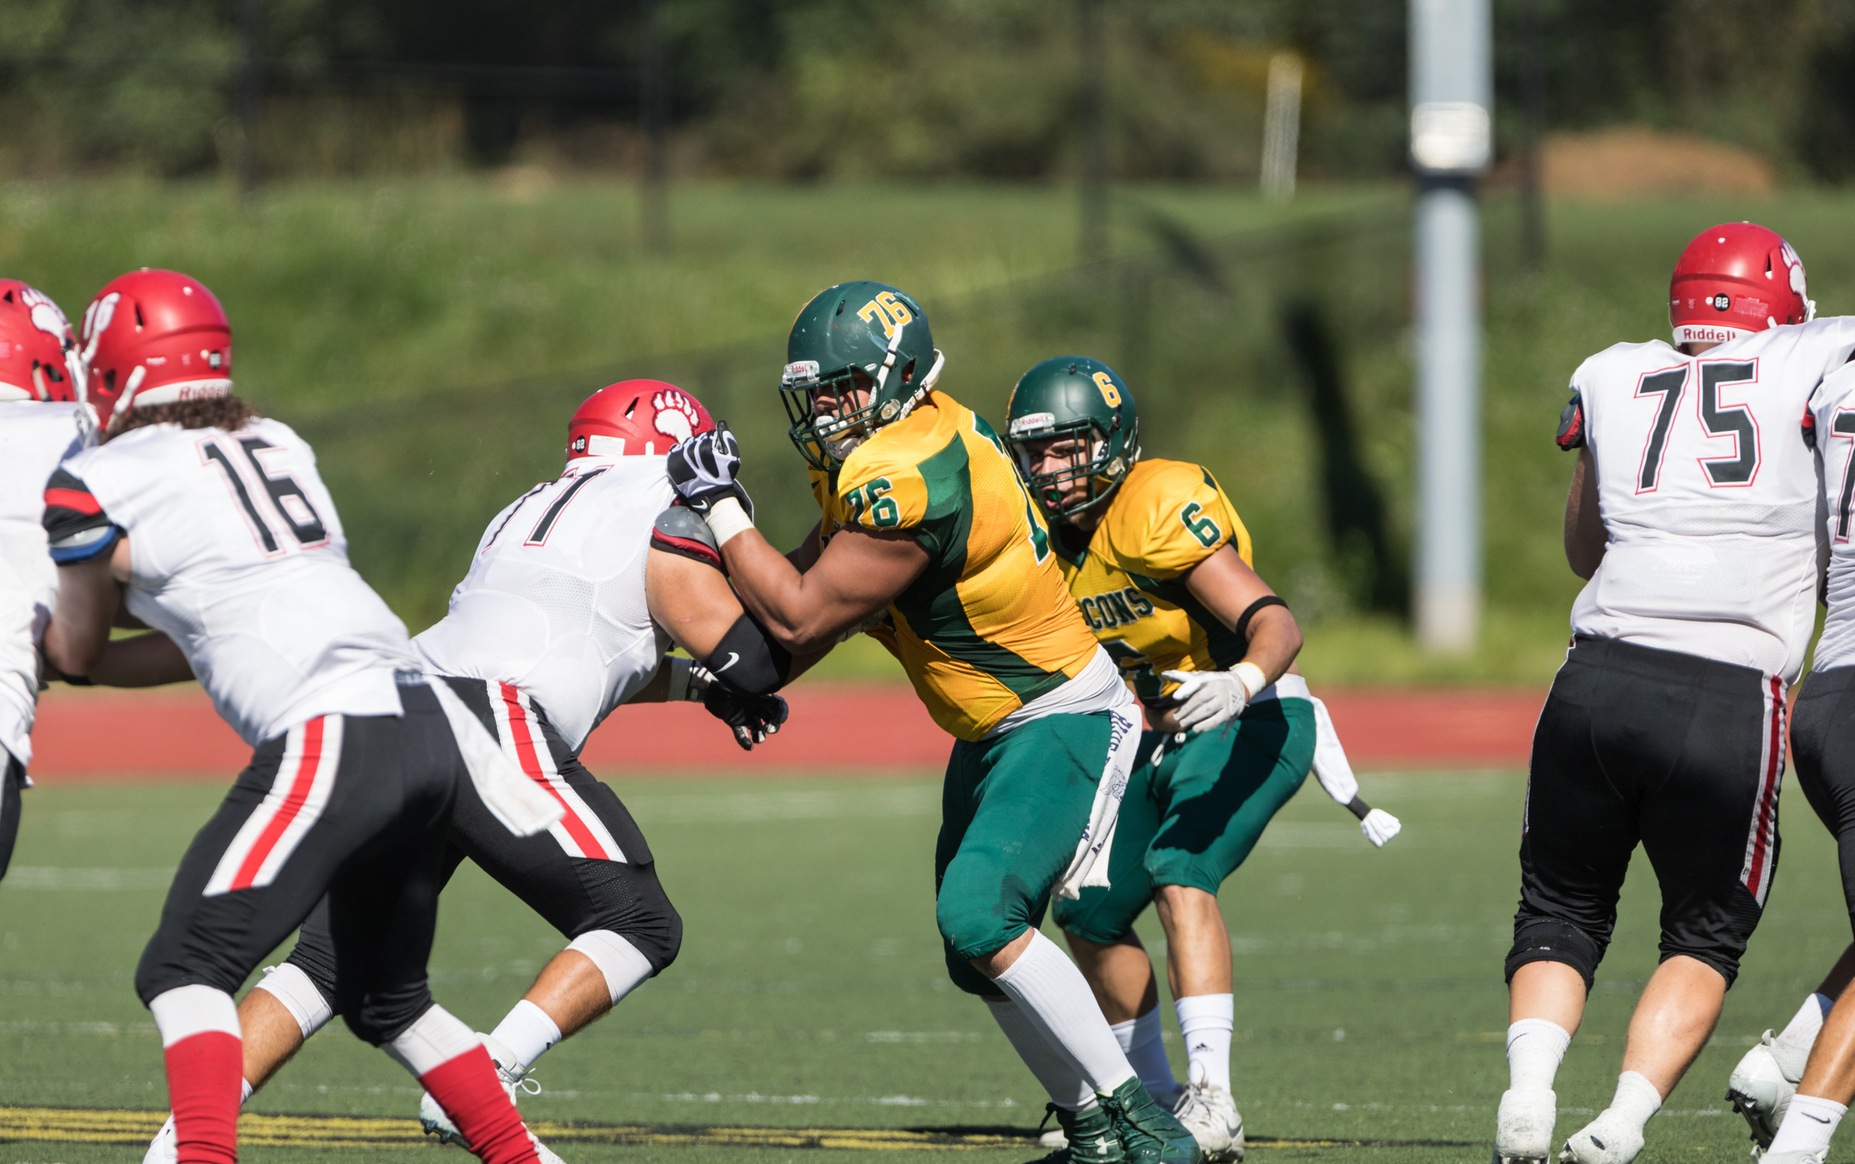  Falcons Fall to Rams in MASCAC action, 32-16